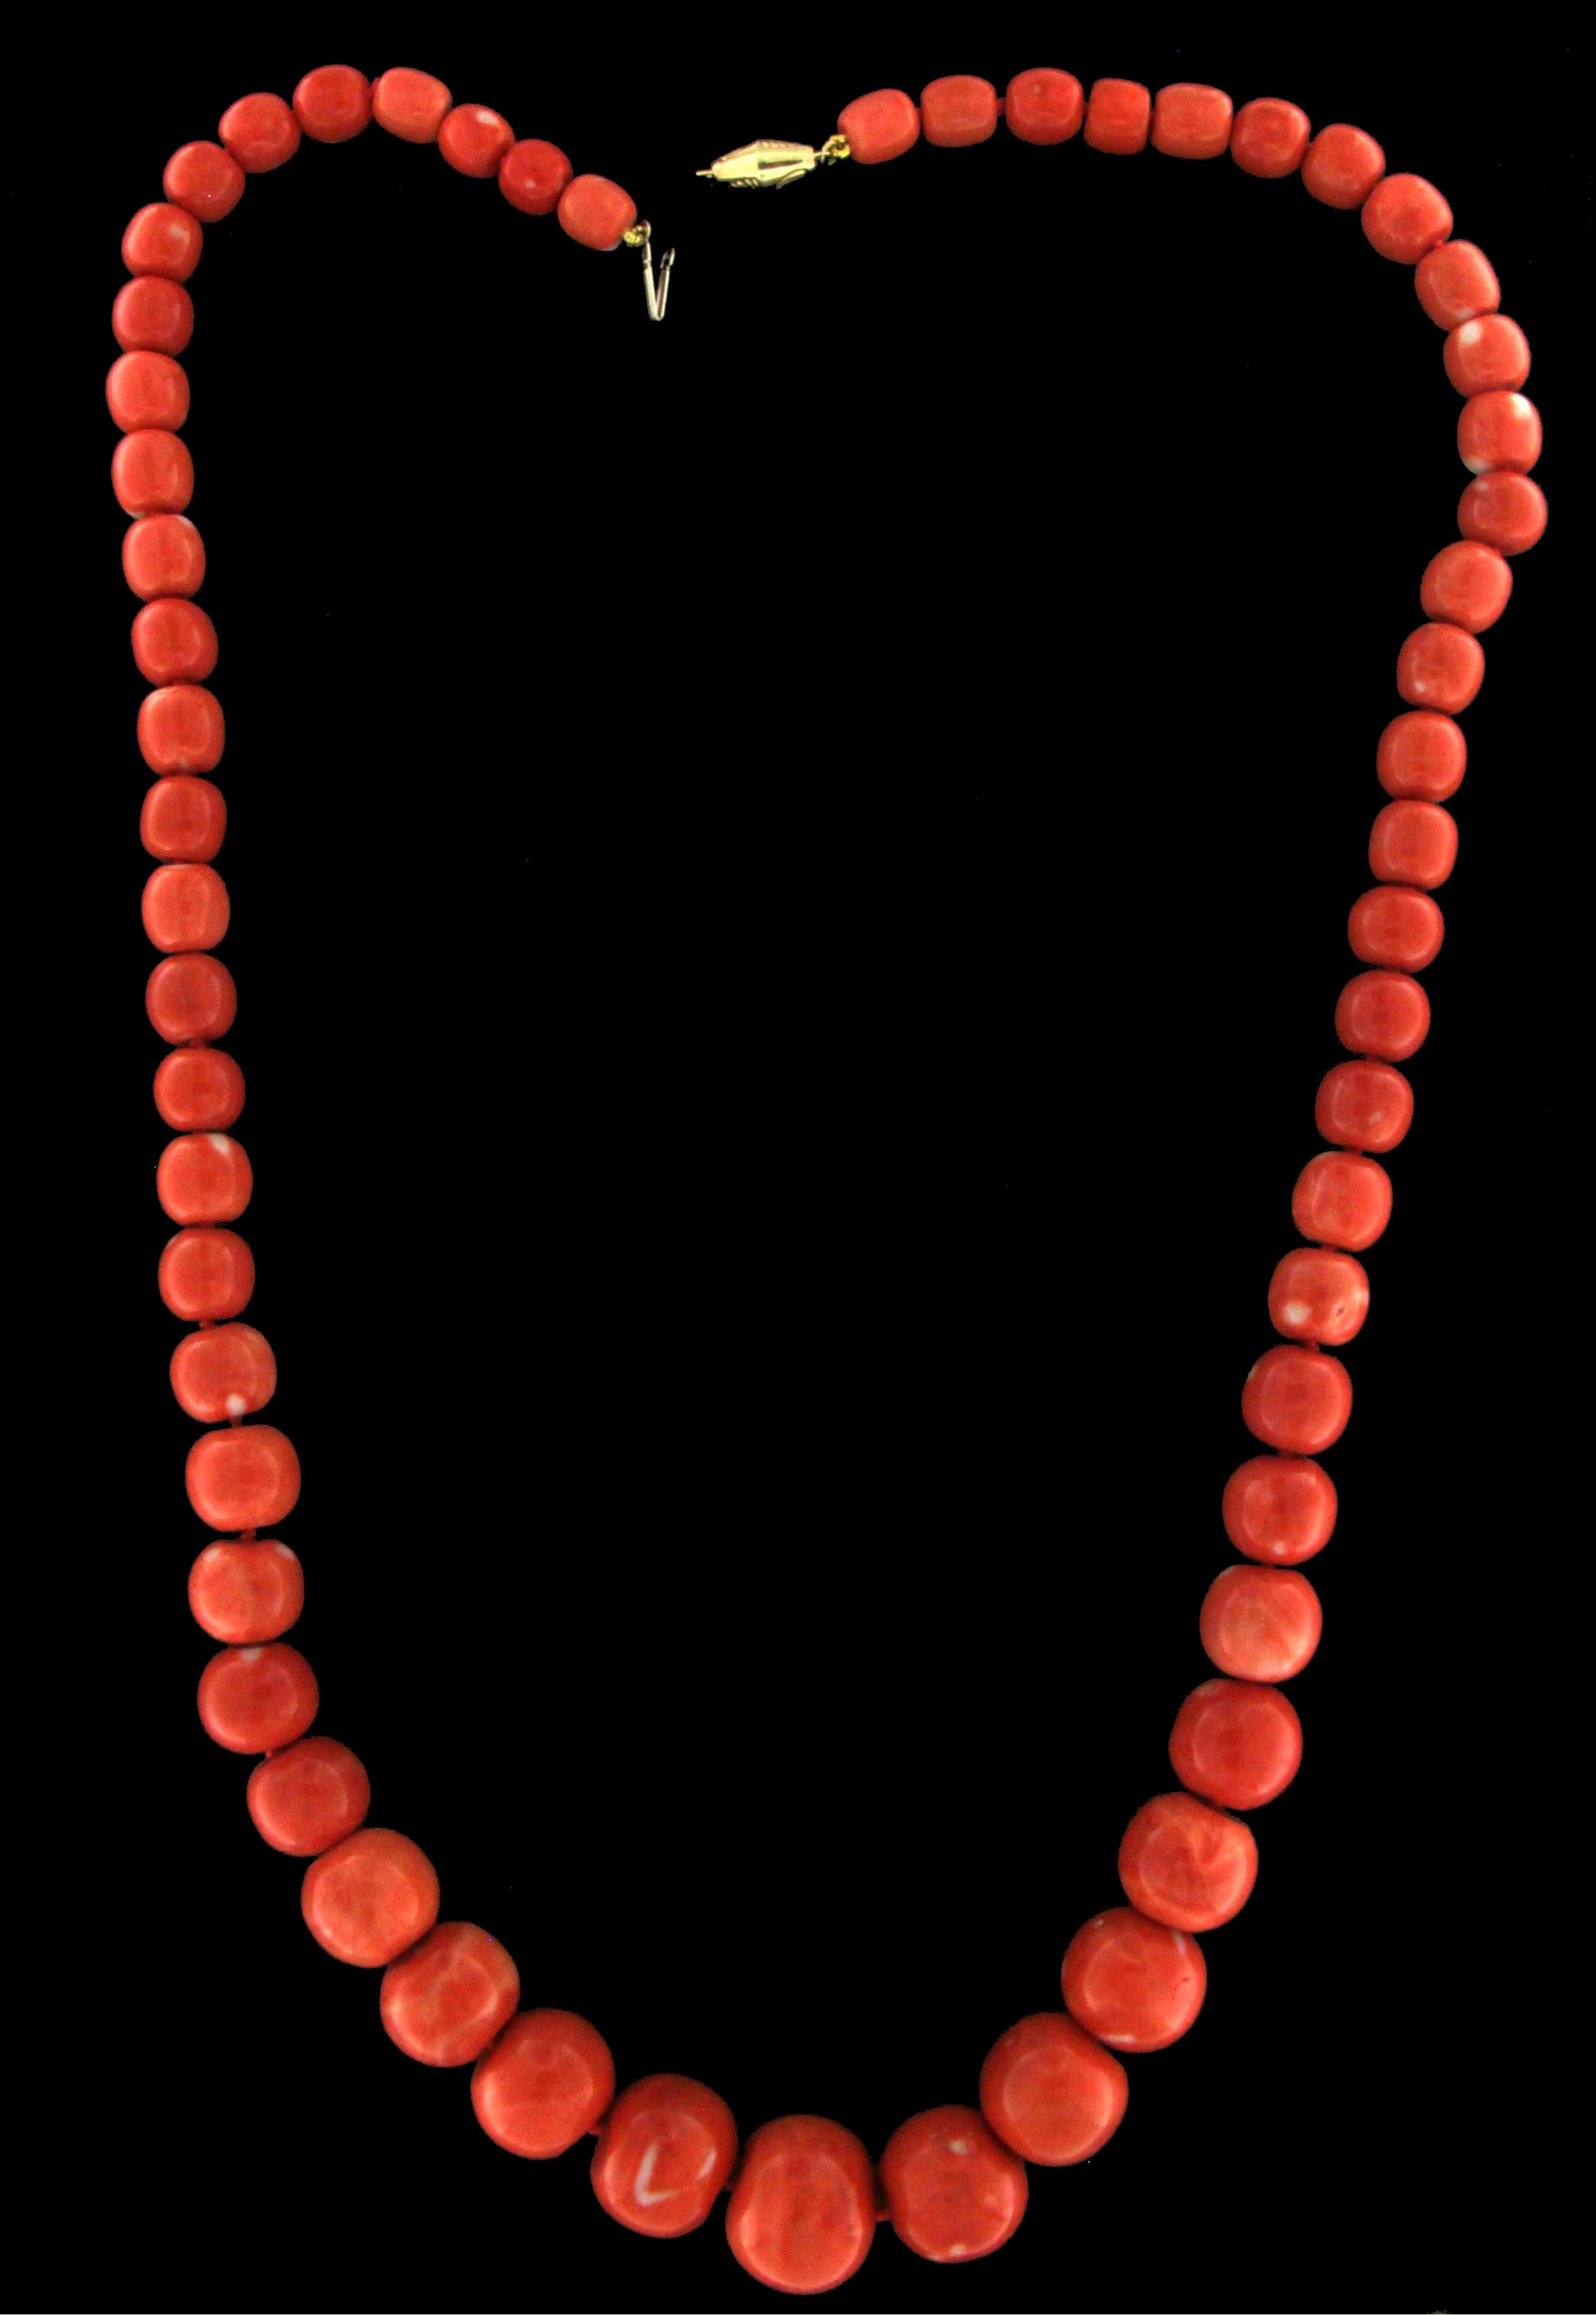 Momo Coral 18 Karat Yellow Gold Clasp Rope Necklace
The biggest ball size (length) 1.90 cm (width) 1.60 cm and the smallest (length) 0.90 cm (width) 0.90 cm

Coral weight 162.70 grams
Length 72 cm (open necklace)